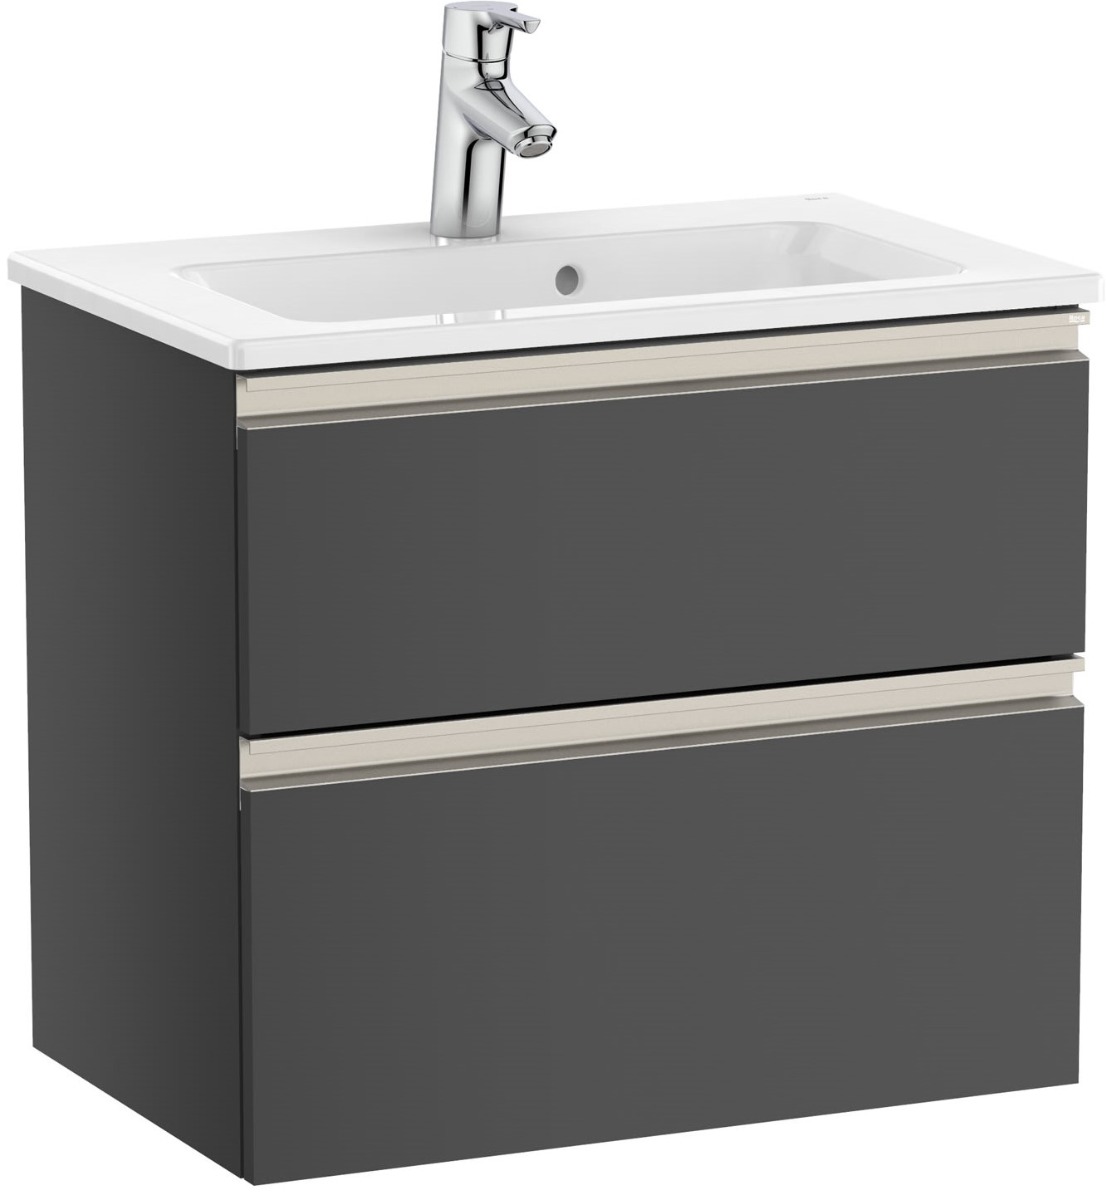 Unik (compact base unit with two drawers and basin)-153 - ANTHRACITE GREY